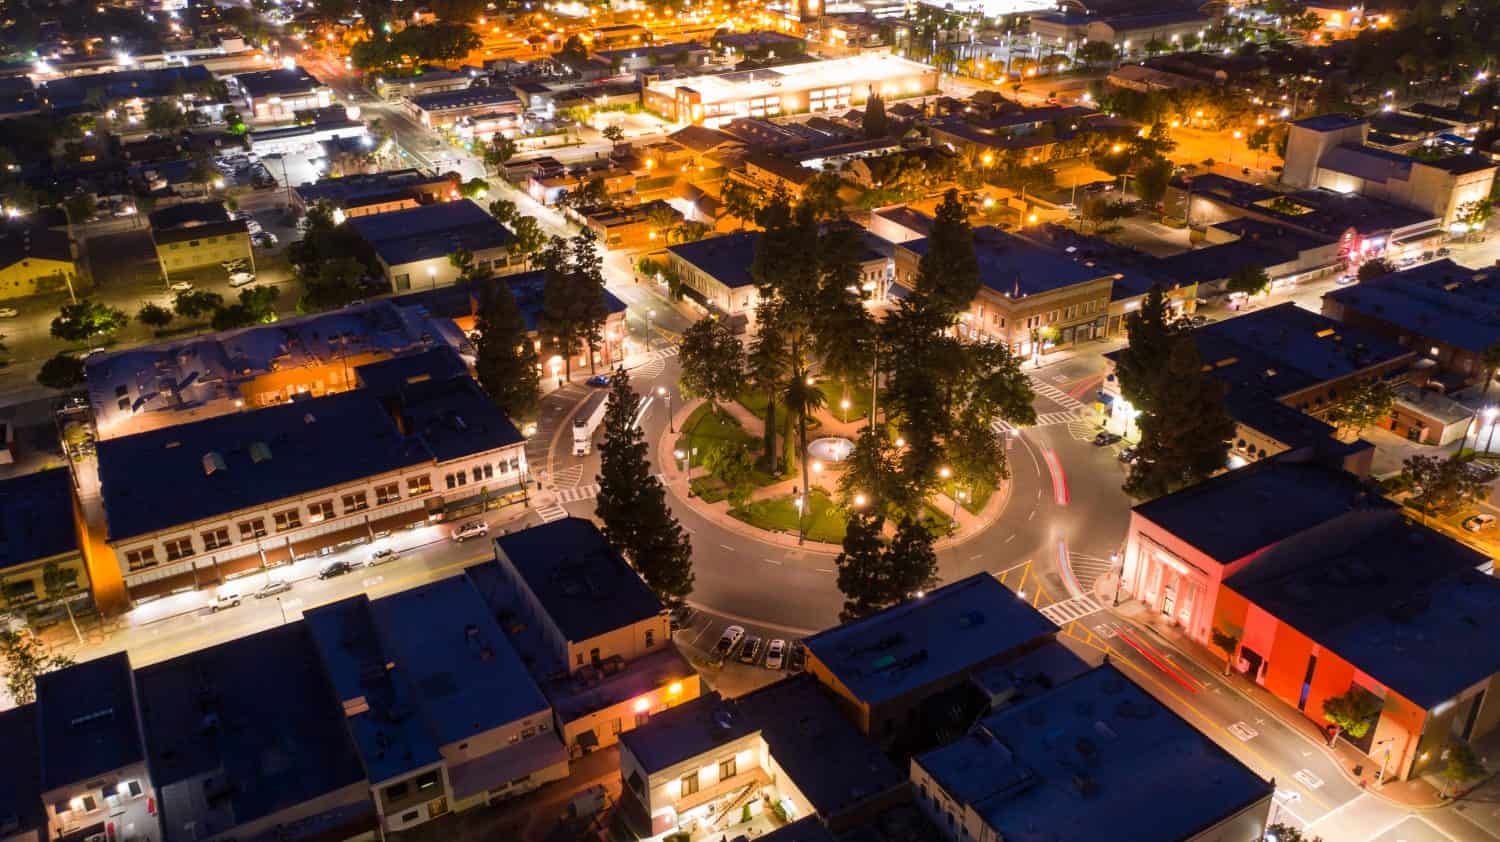 Twilight descends on the historic Old Towne section of the city of Orange.